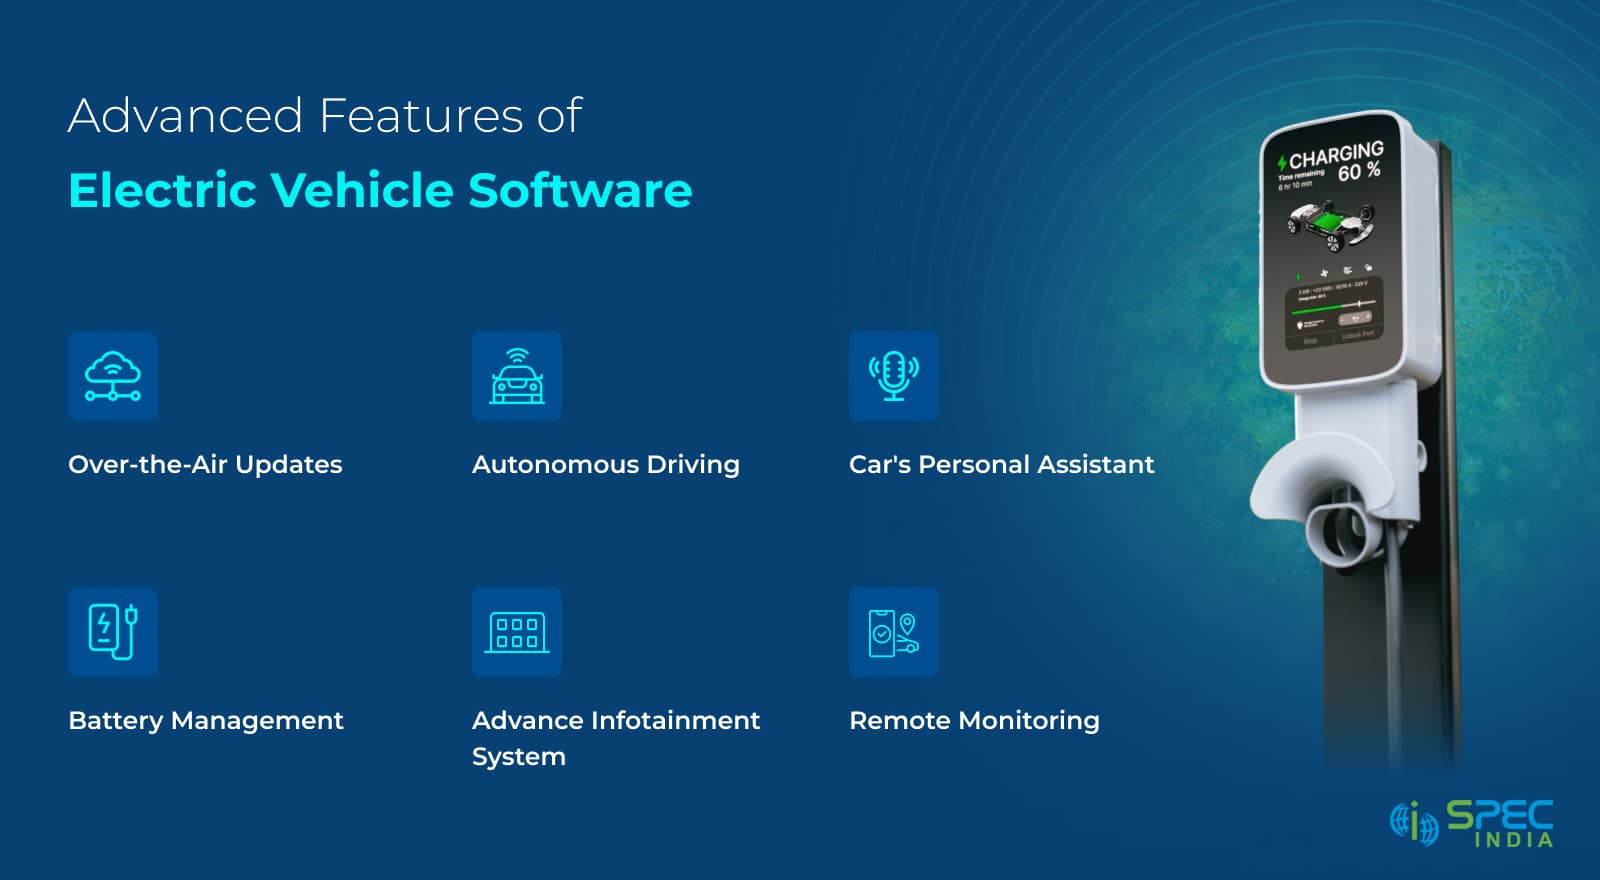 Advanced Features of Electric Vehicle Software